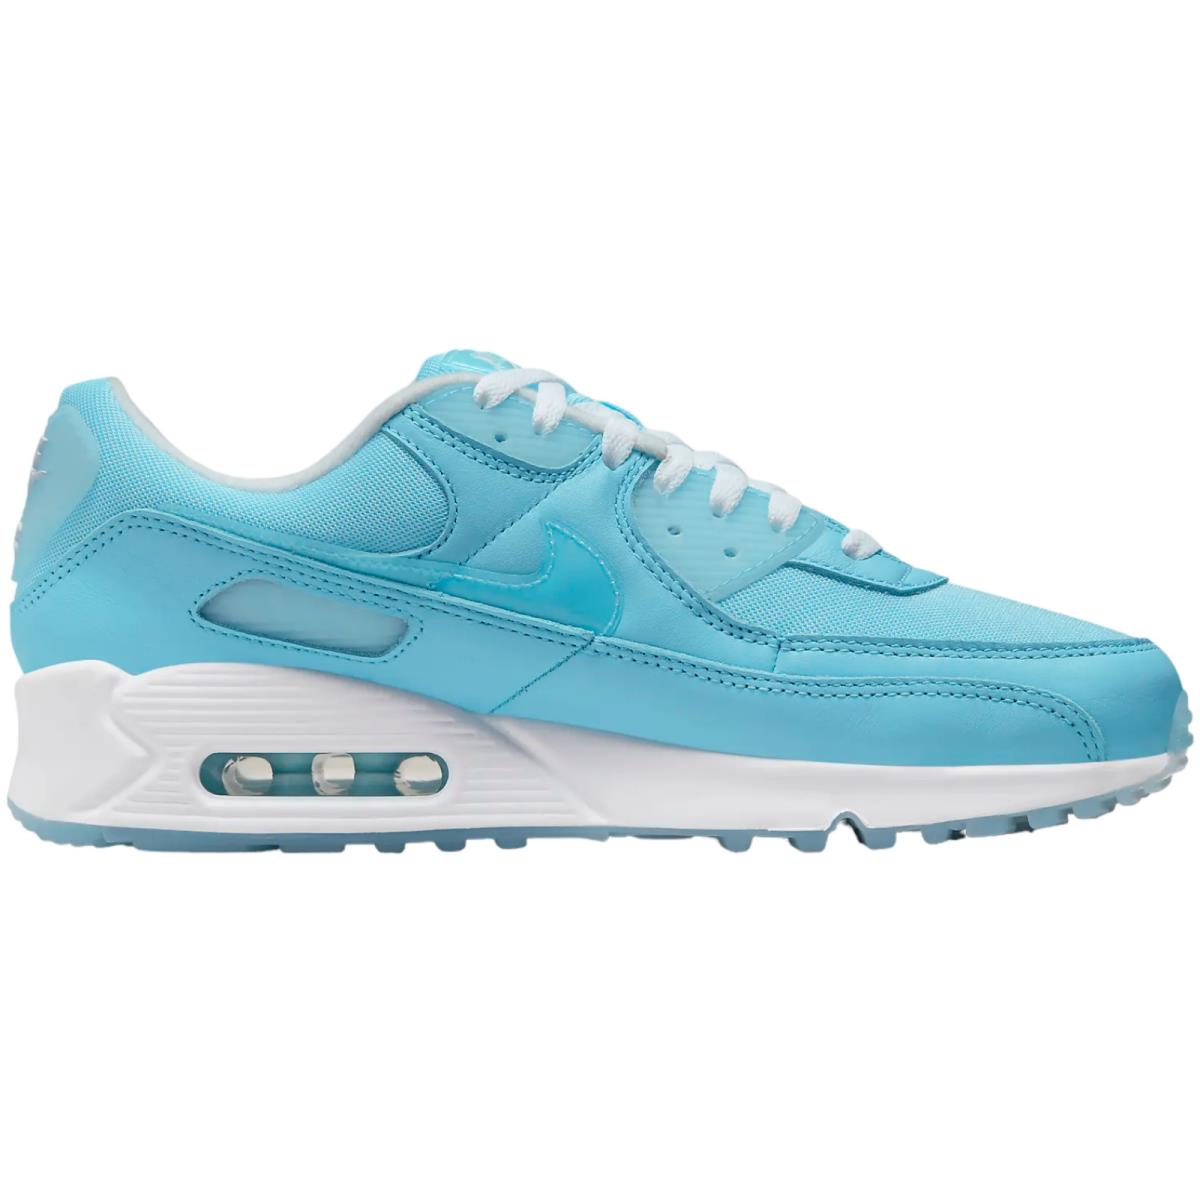 Nike Air Max 90 Men`s Casual Shoes All Colors US Sizes 7-14 Bestseller Blue Chill/Blue Chill/White